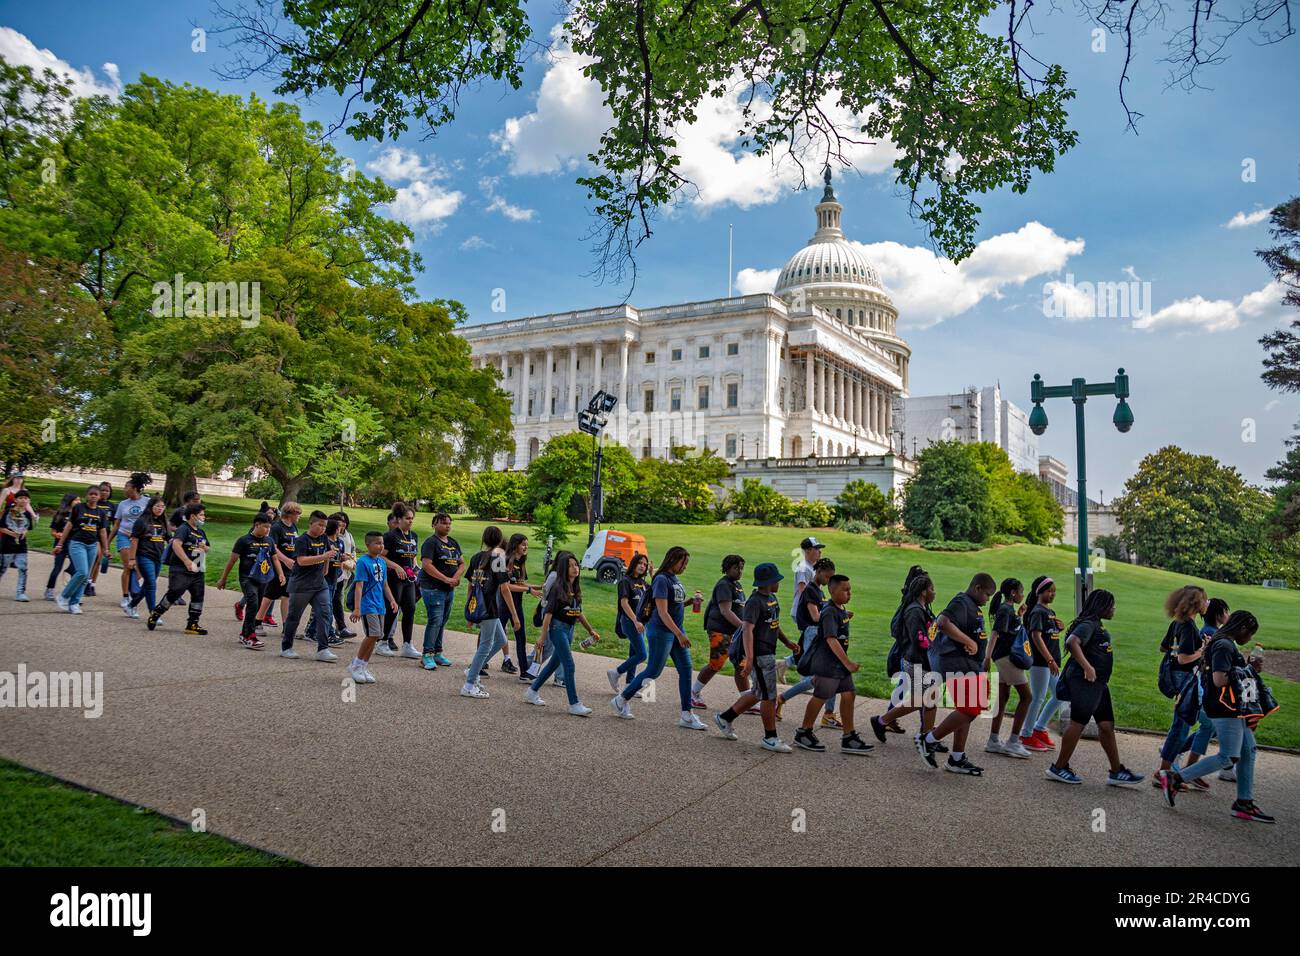 Washington, DC - Fifth and sixth grade students from New Orleans walk past the U.S. Capitol during a visit to Washington. Stock Photo